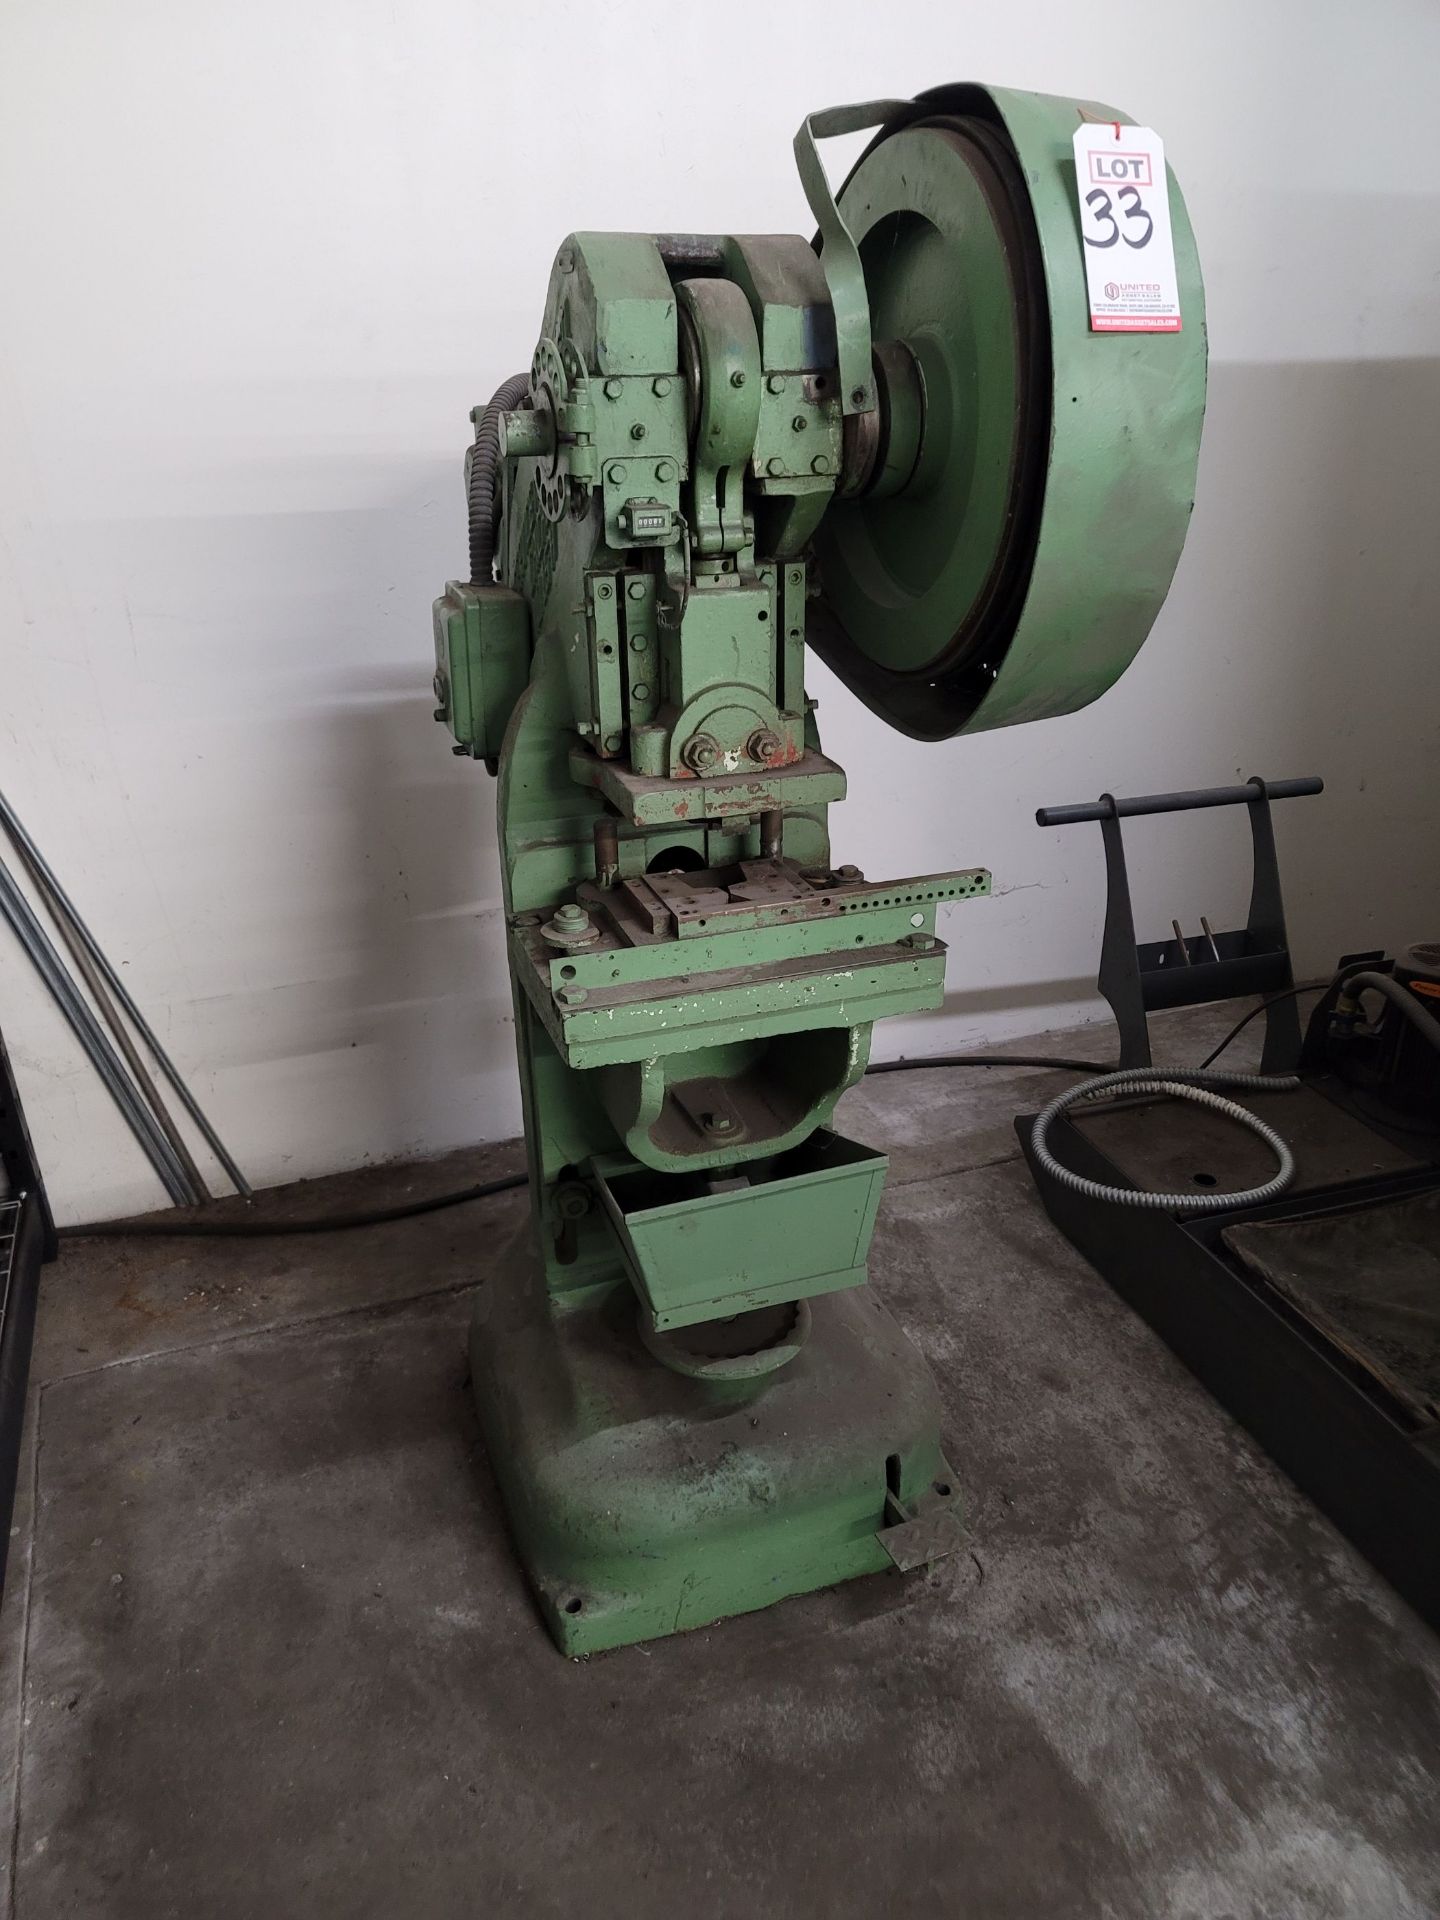 ROUSSELLE NO. 15H STAMPING PRESS, 15-TON, 2" STROKE, 160 SPM, S/N 441